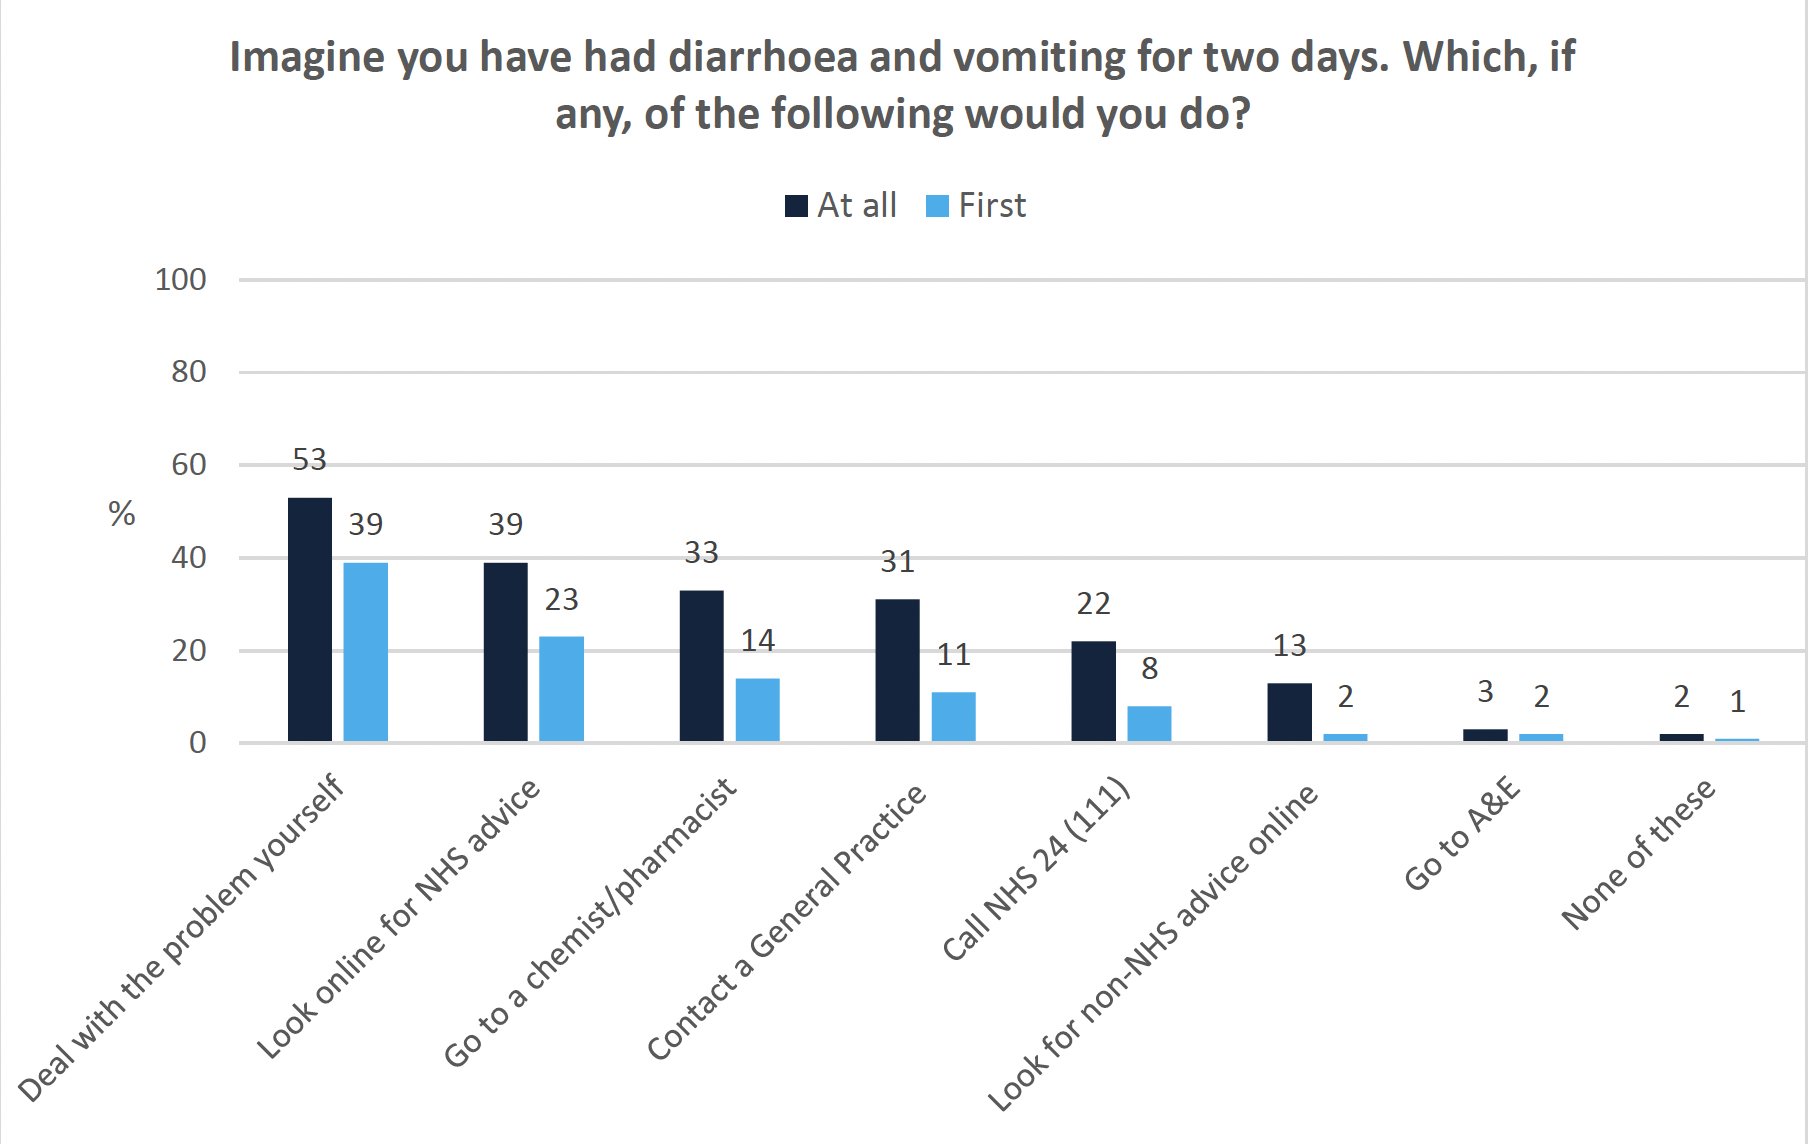 Vertical graph showing responses to a scenario relating to diarrhoea and vomiting and how people would use services
A vertical graph that shows what respondents would do if they have been having diarrhoea and vomiting for the last two days. Respondents could chose ‘at all’ or ‘first’ for each scenario. Participants could choose more than one option for the “at all” response. The responses for both scenarios, in descending order of percentages, were Deal with the problem yourself, Look online for NHS advice, Go to a chemist/pharmacist, Contact a General Practice, Call NHS24 (111), Look for non-NHS advice online, Go to A&E, and None of these. 